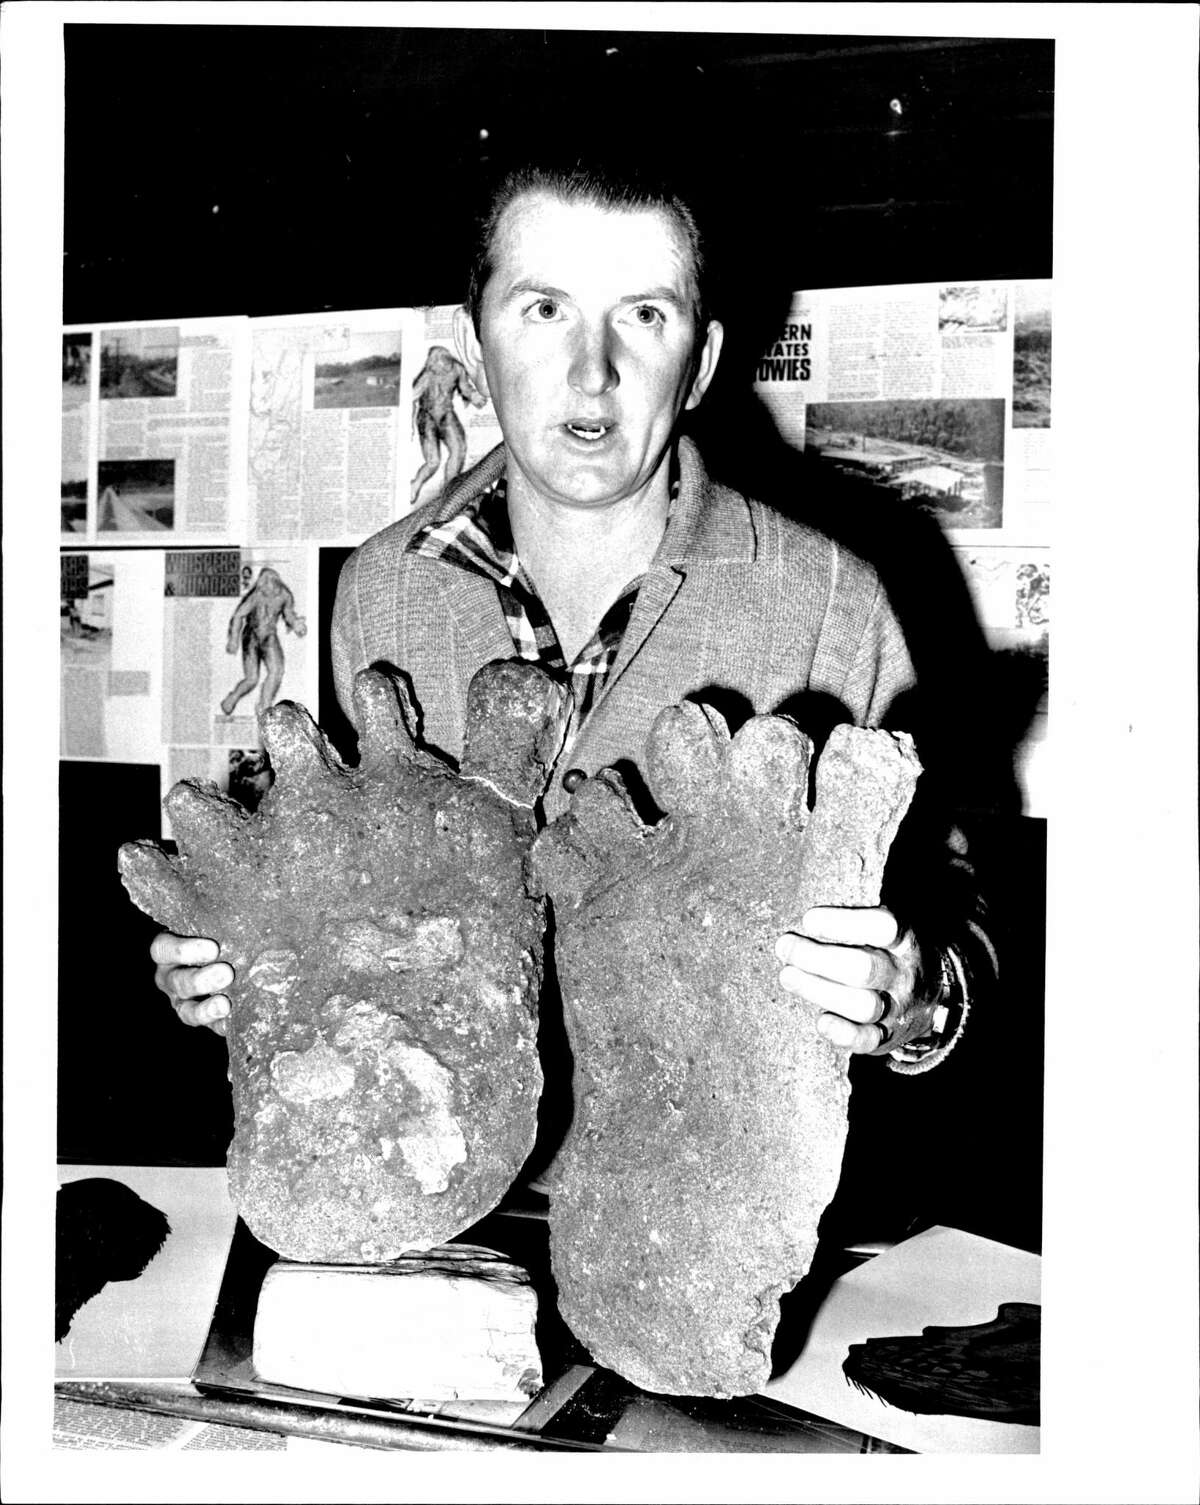 Naturalist Rex Gilroy shows plaster cast impressions of a Yowie, an Australian equivalent of Bigfoot.